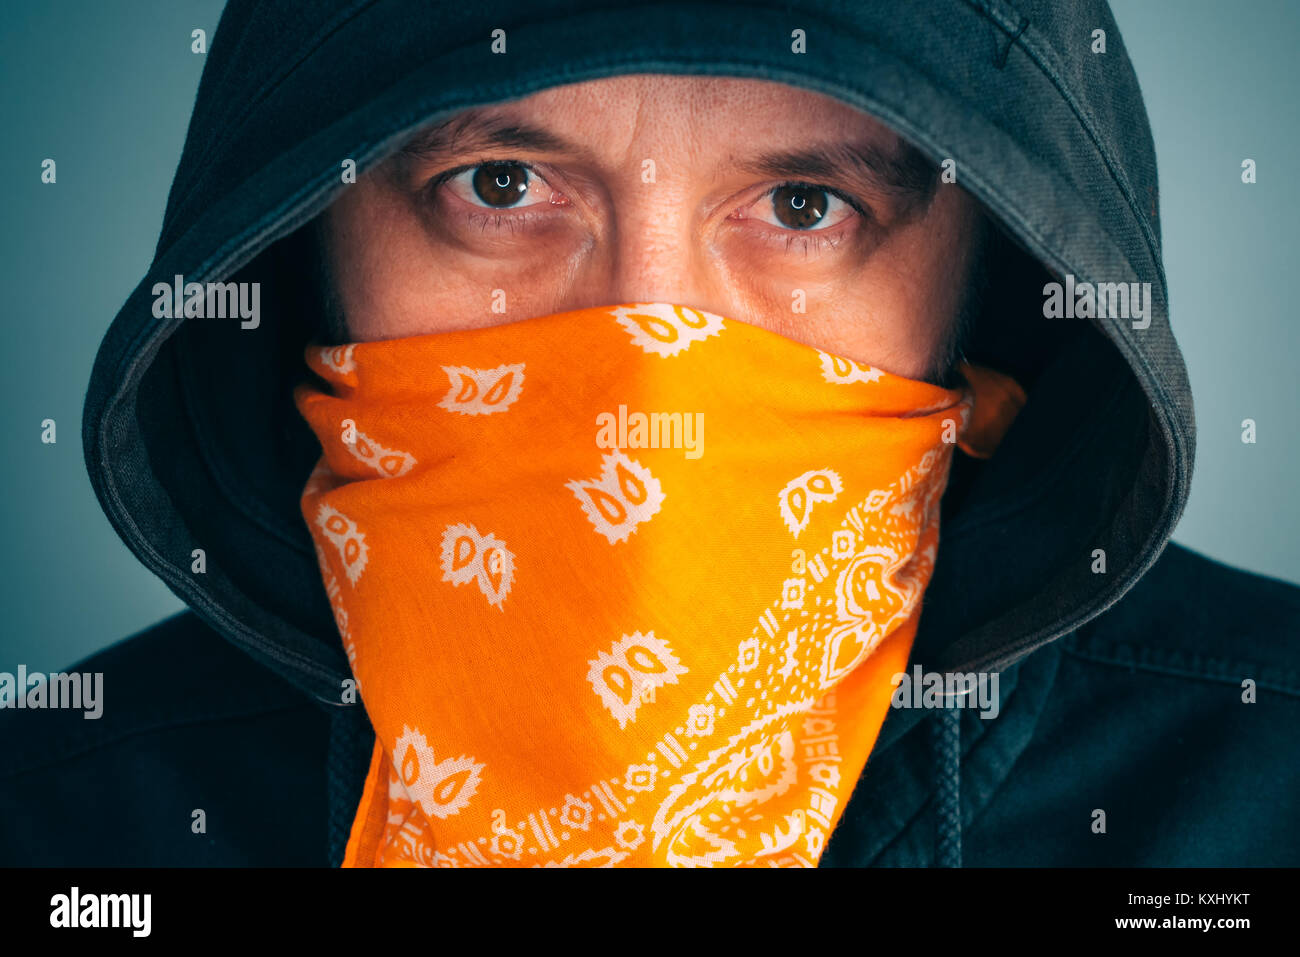 Portrait of masked criminal male person looking at camera. Adult man with hoodie and scarf over face as bandit or gang member, extreme close up Stock Photo